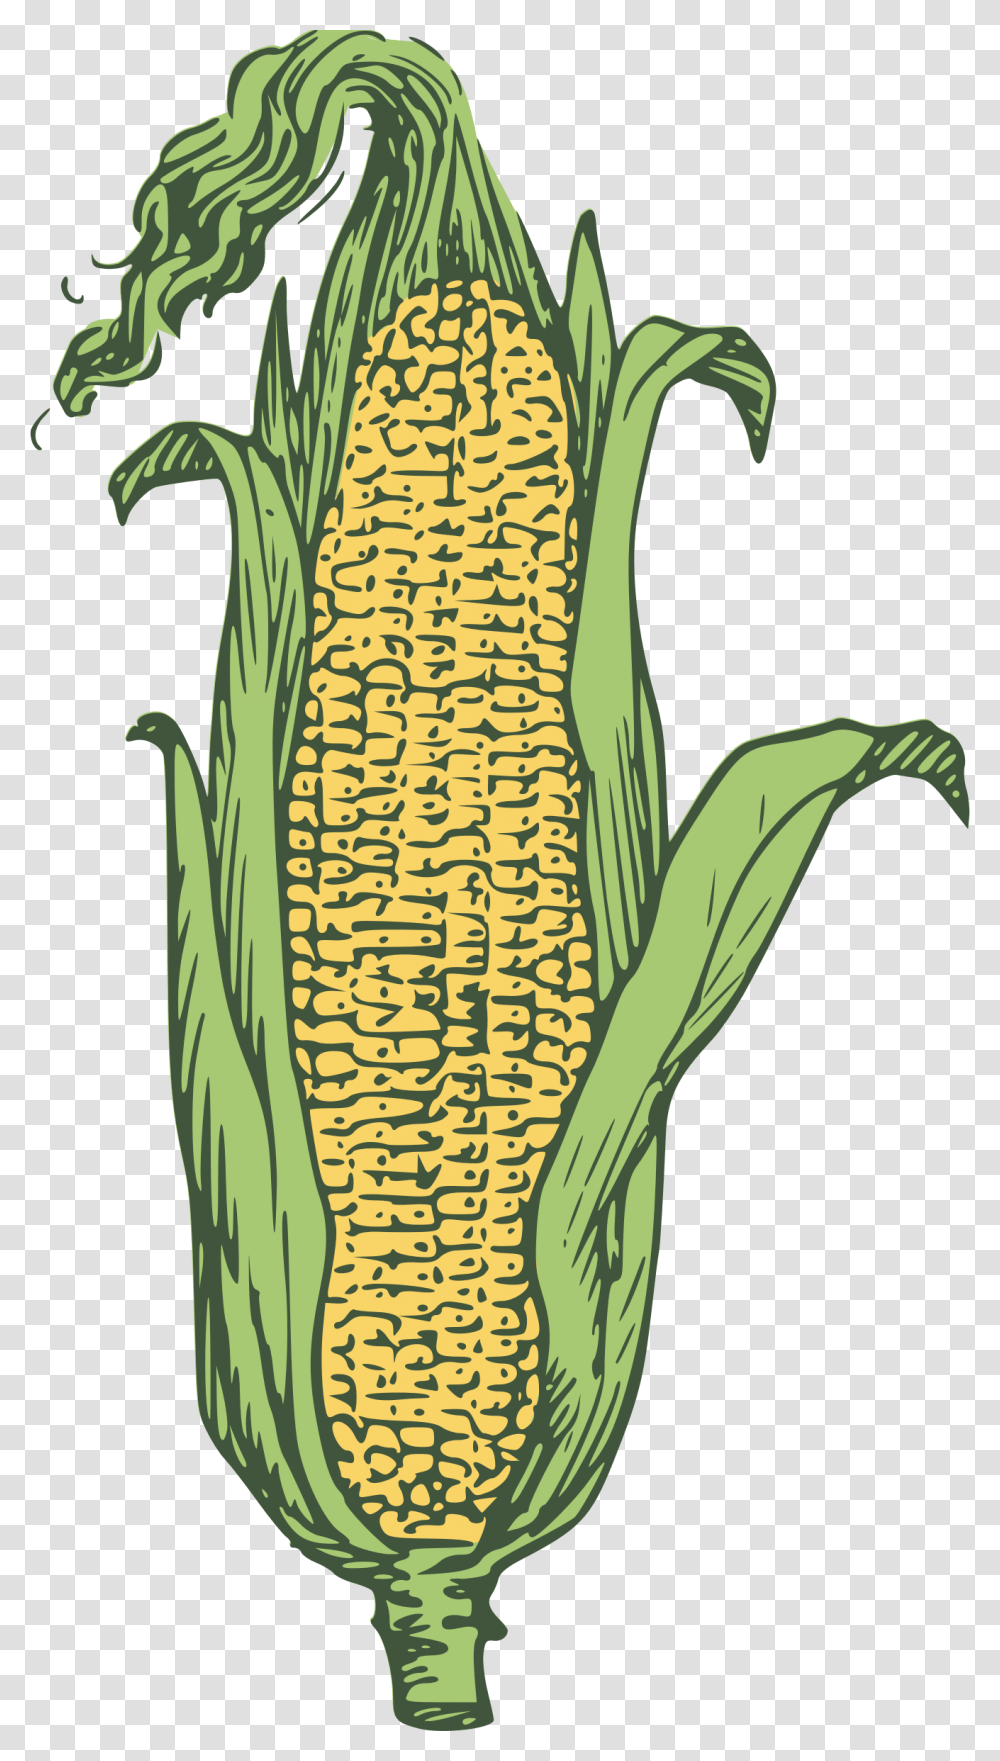 Candy Corn Corn On The Cob Popcorn Maize Ear Grain As Big As A Hen's Egg, Plant, Vegetable, Food, Bird Transparent Png